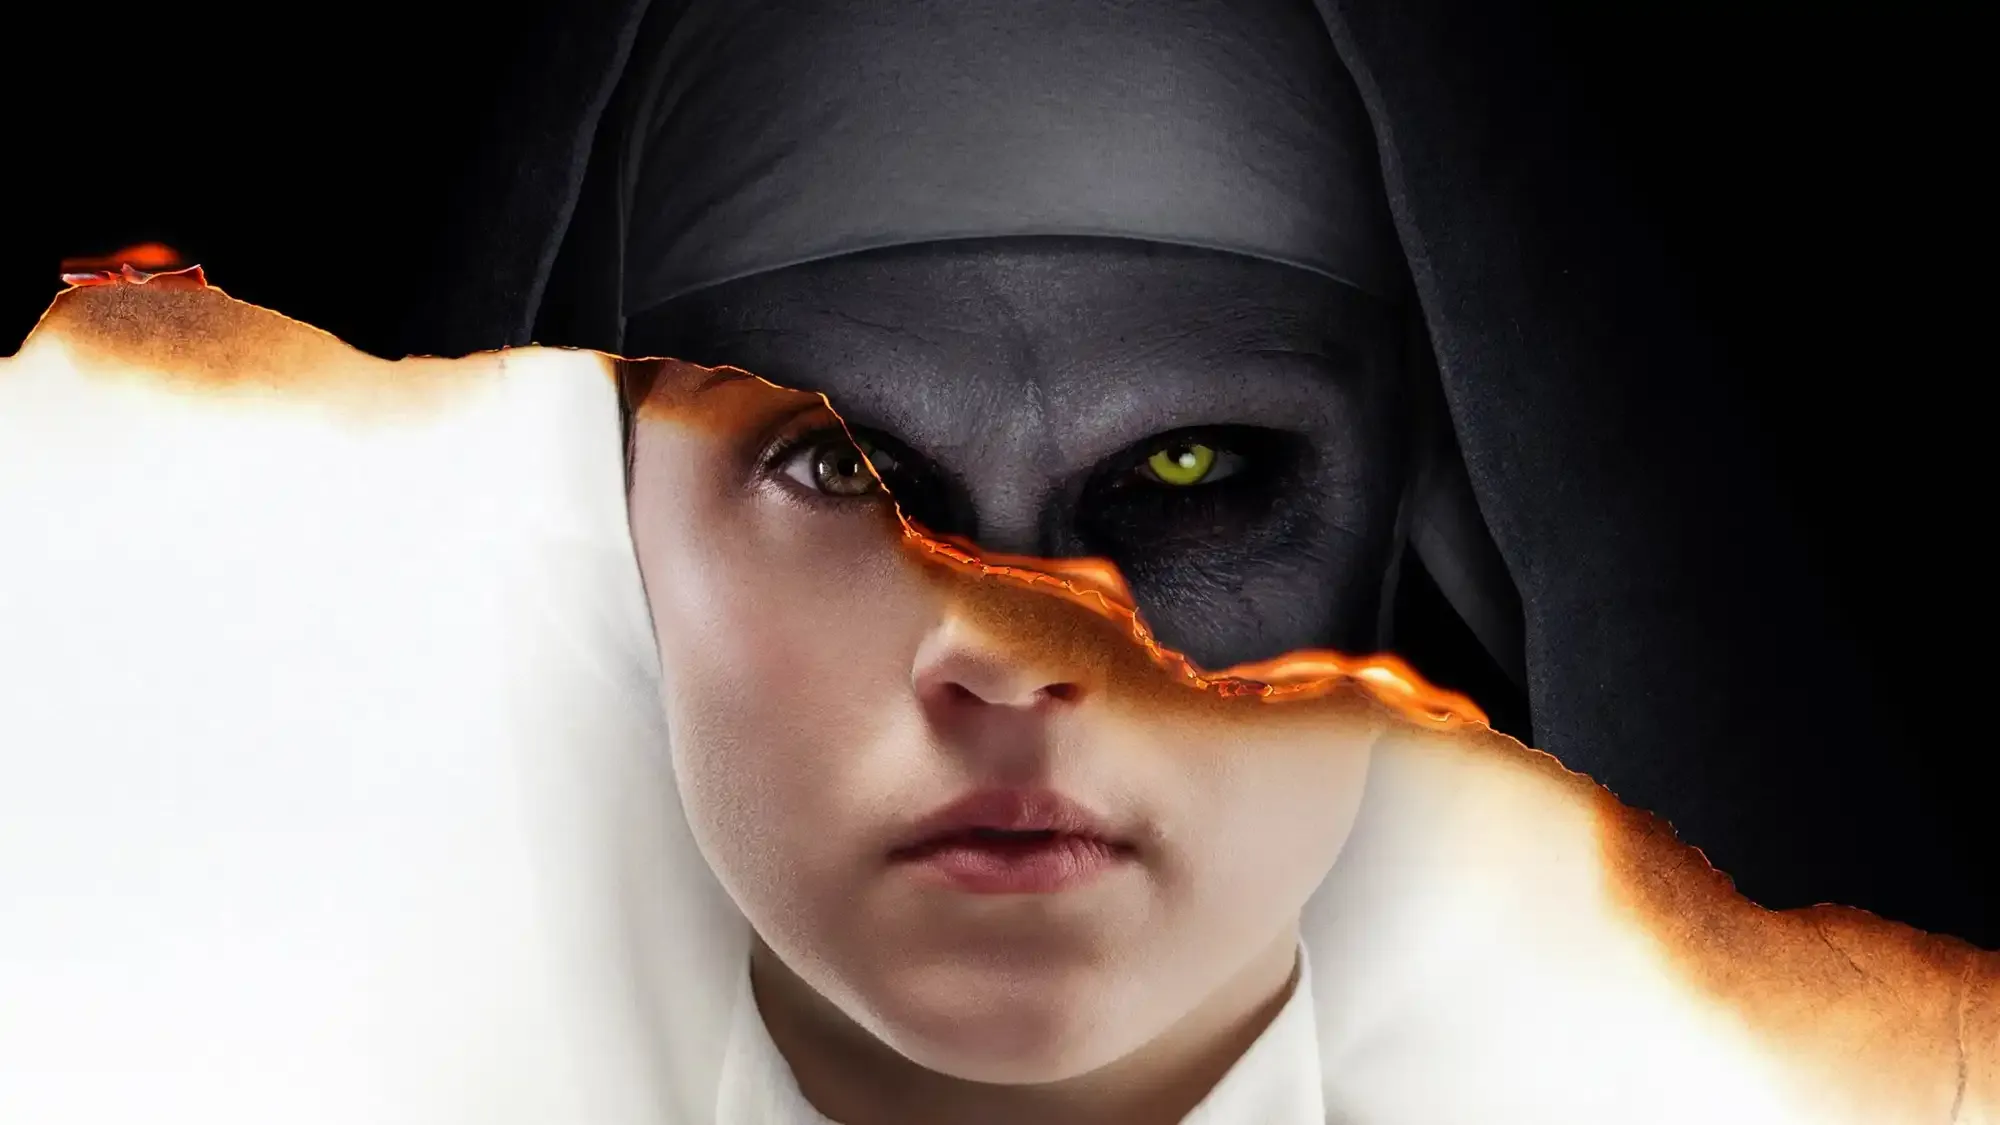 The Nun movie review